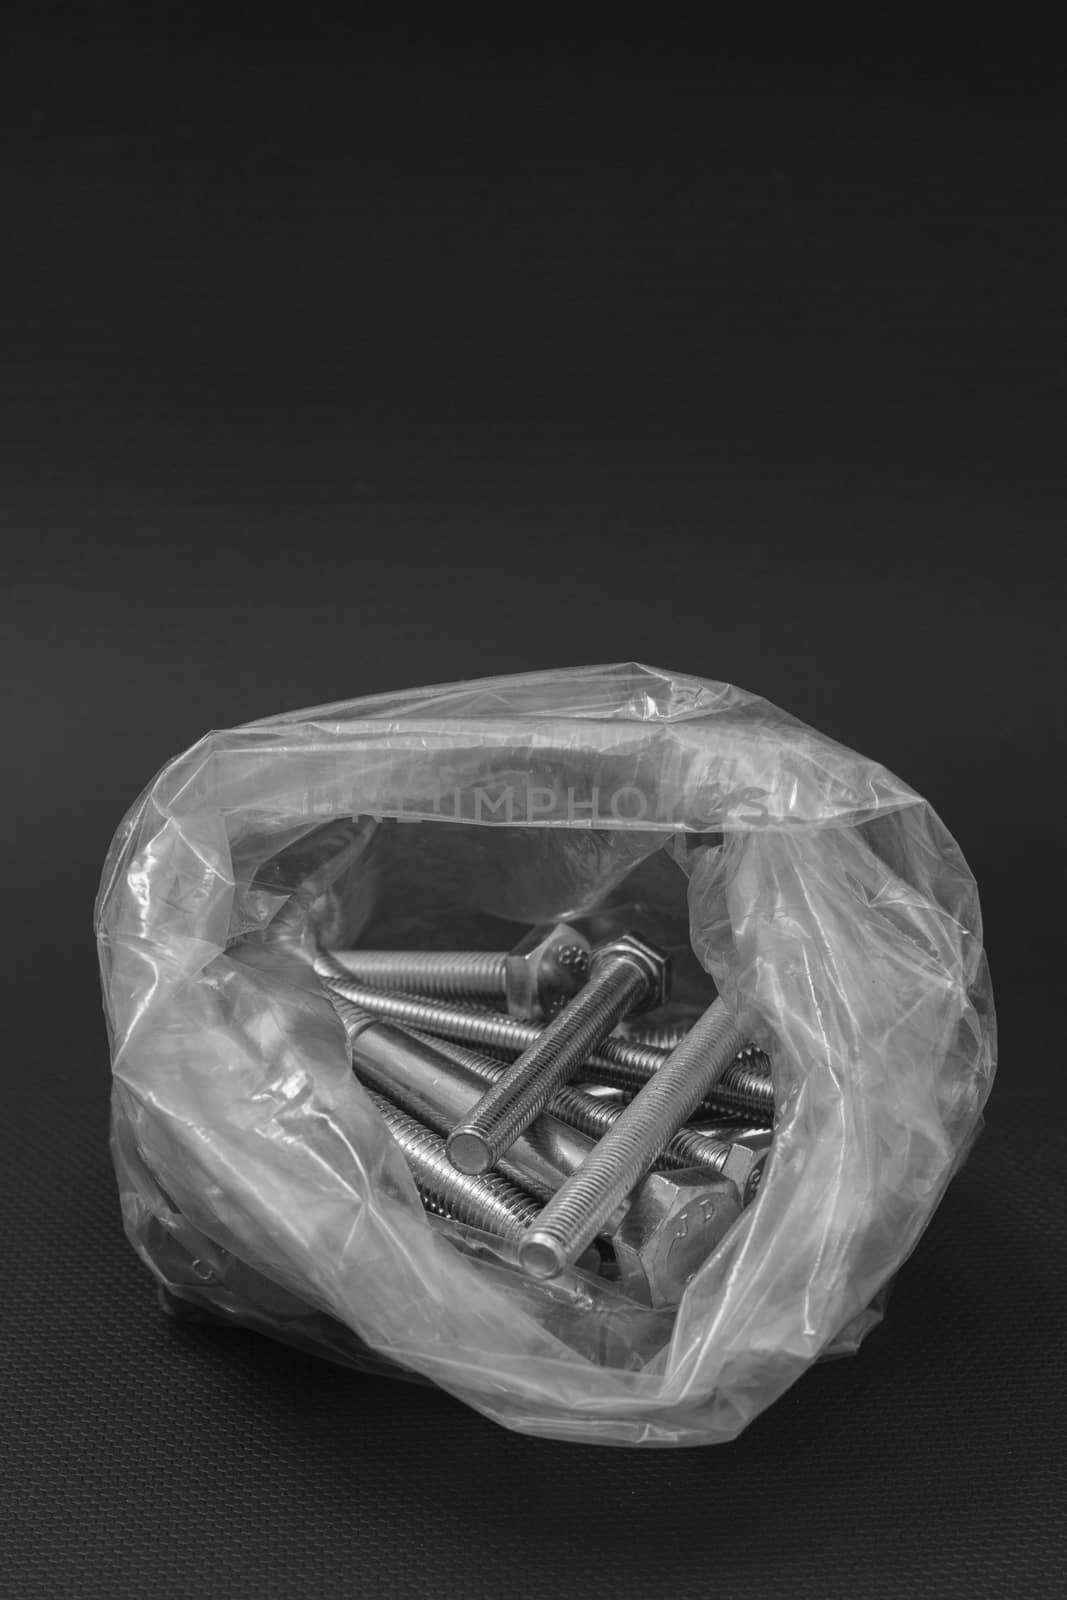 Bolts in a clear plastic bag on a black background by mailos